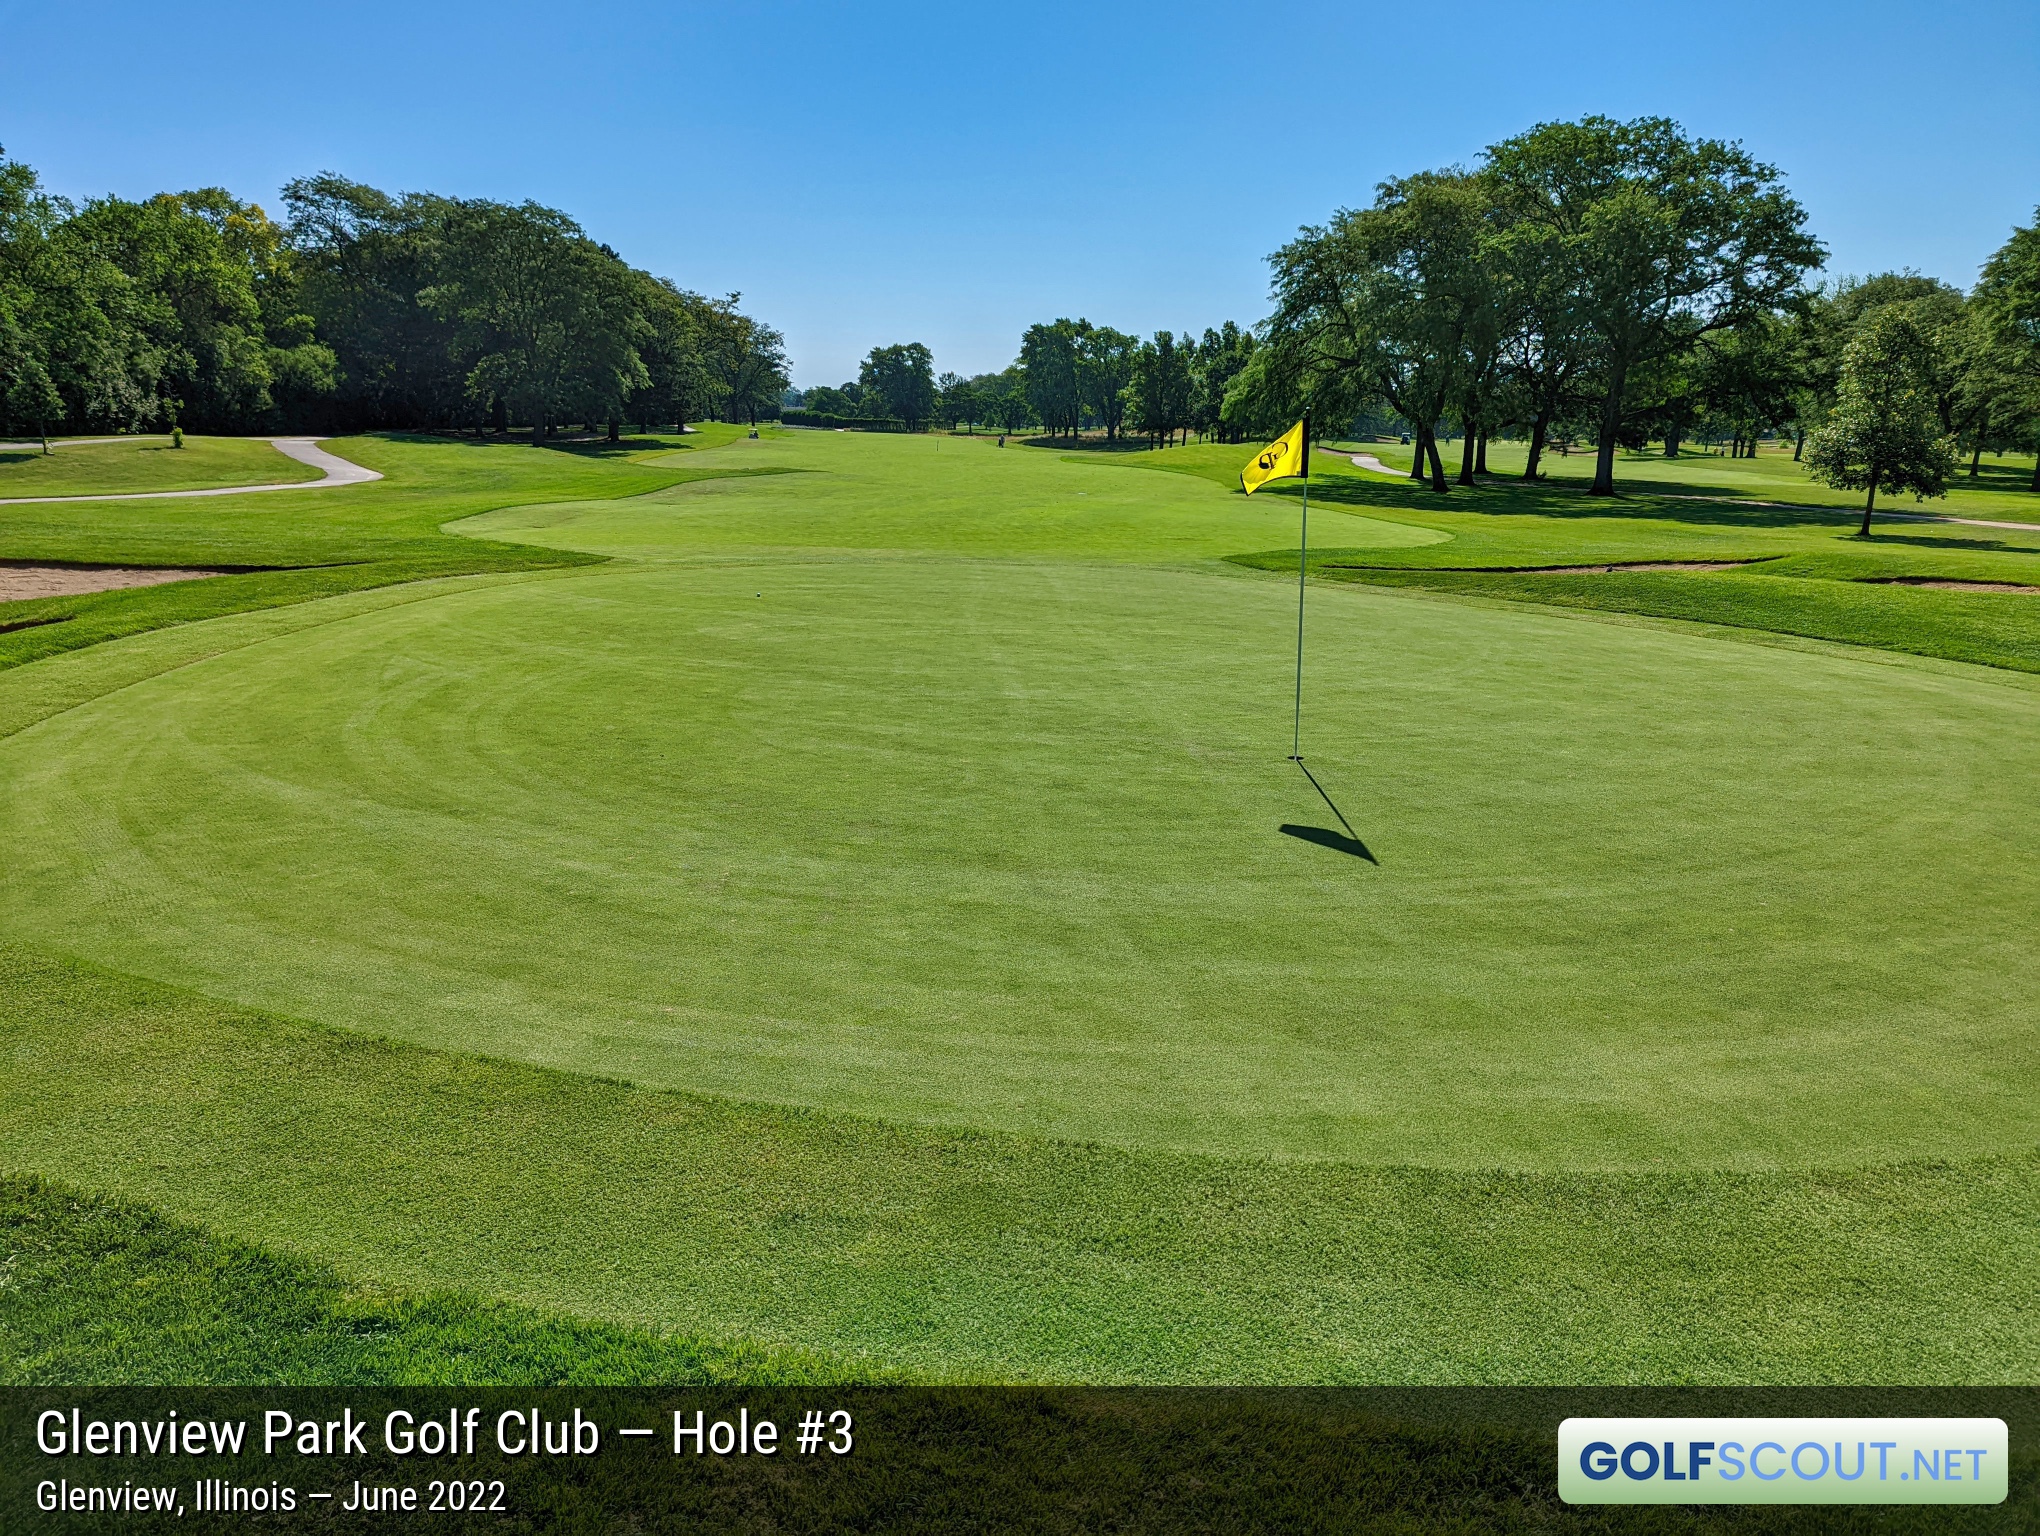 Photo of hole #3 at Glenview Park Golf Club in Glenview, Illinois. 